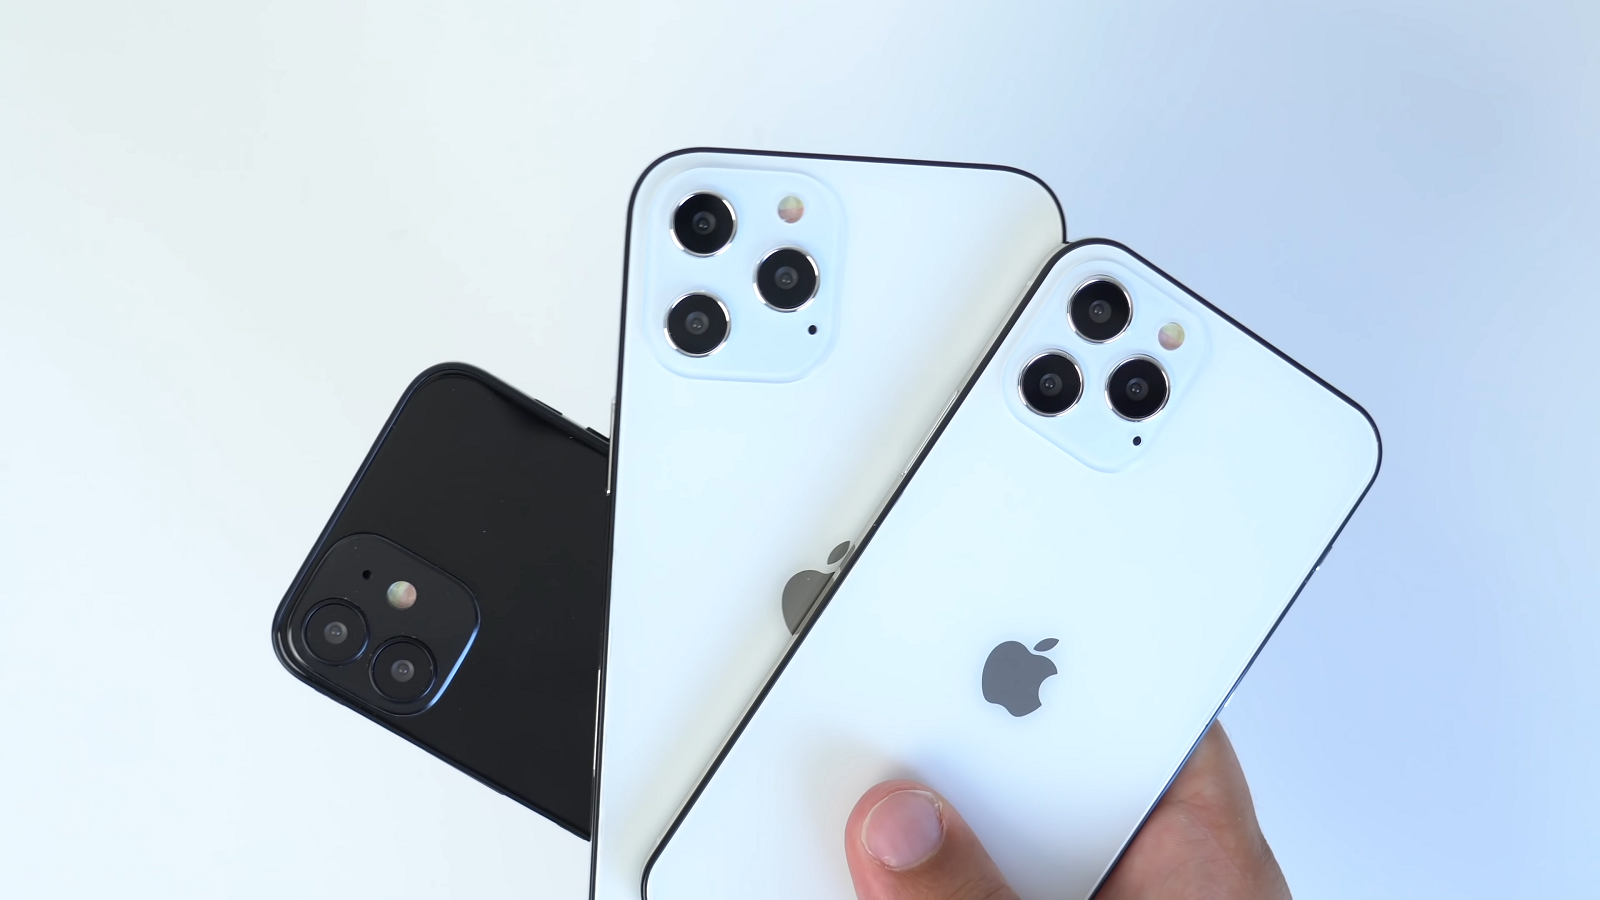 Here’s the iPhone 12 dimension comparison you’ve been awaiting